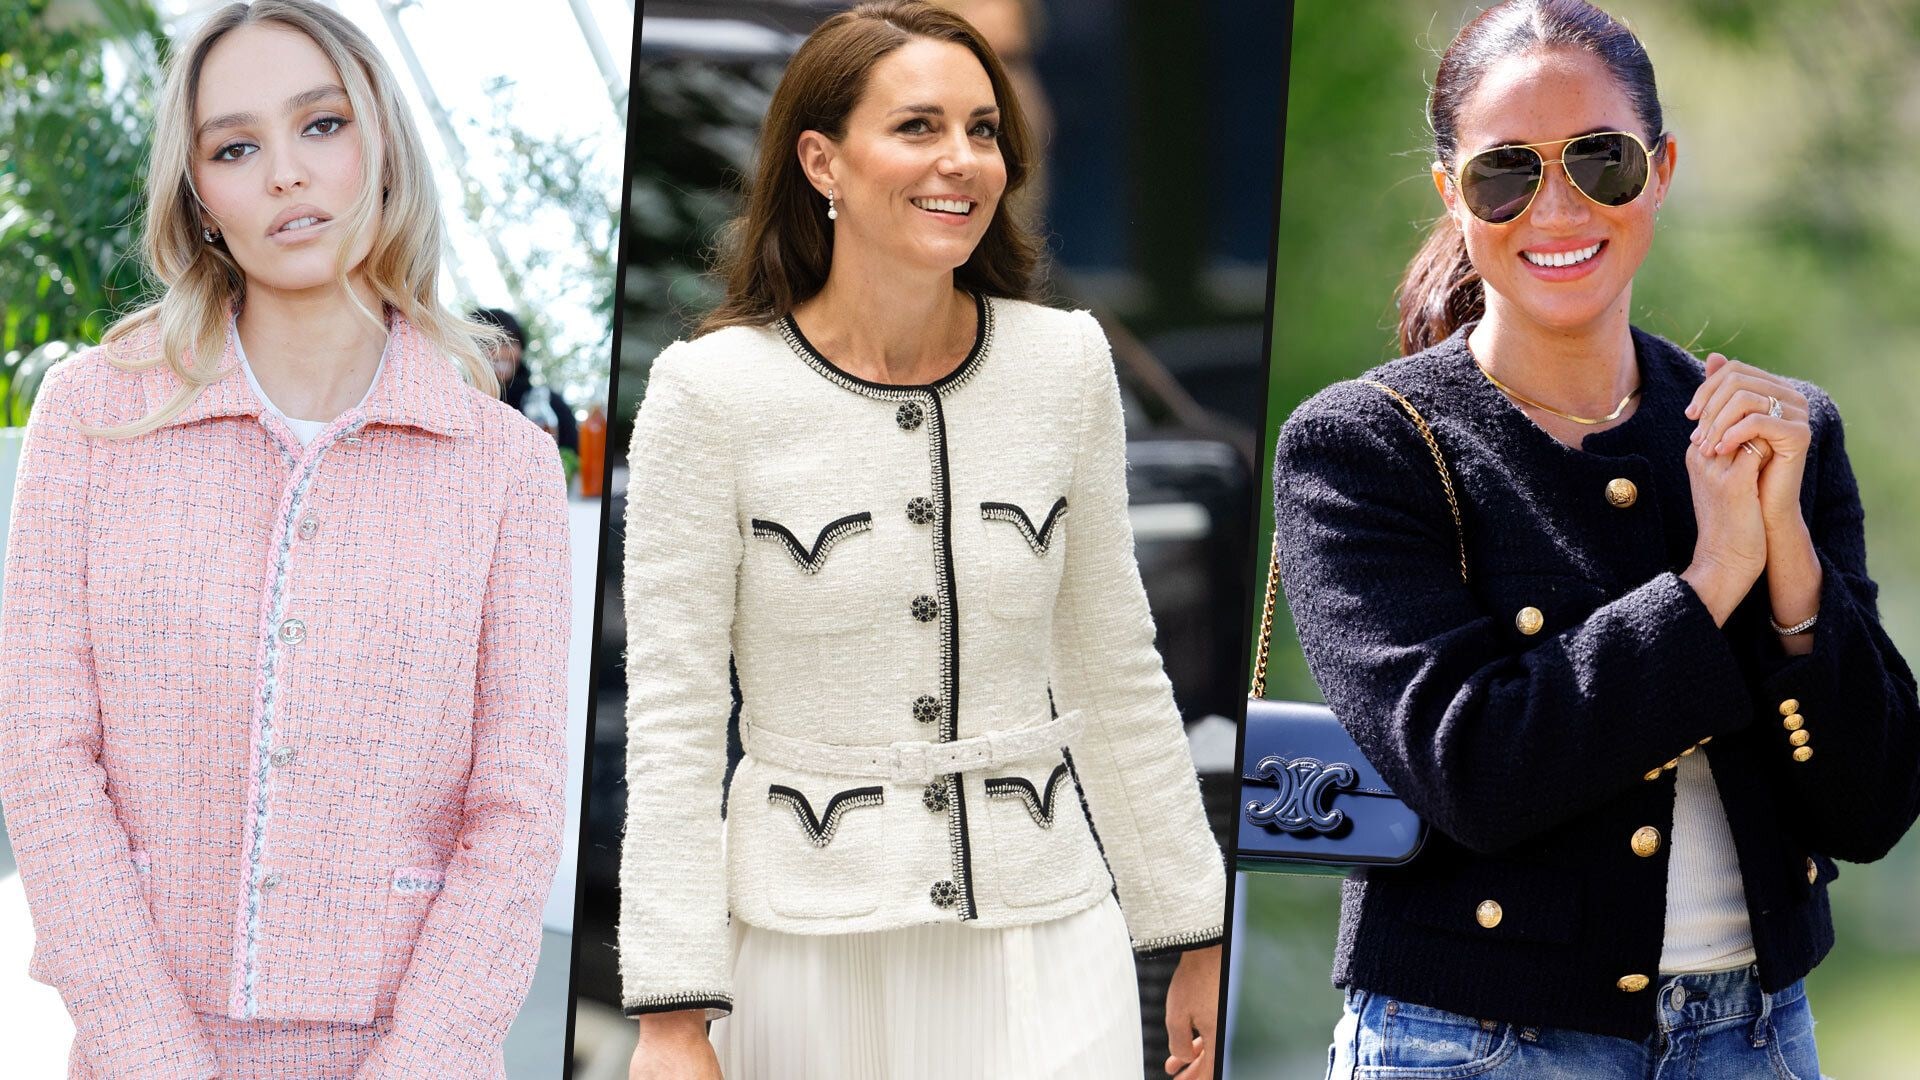 7 best Chanel style cropped jackets: From M&S to Zara to ASOS